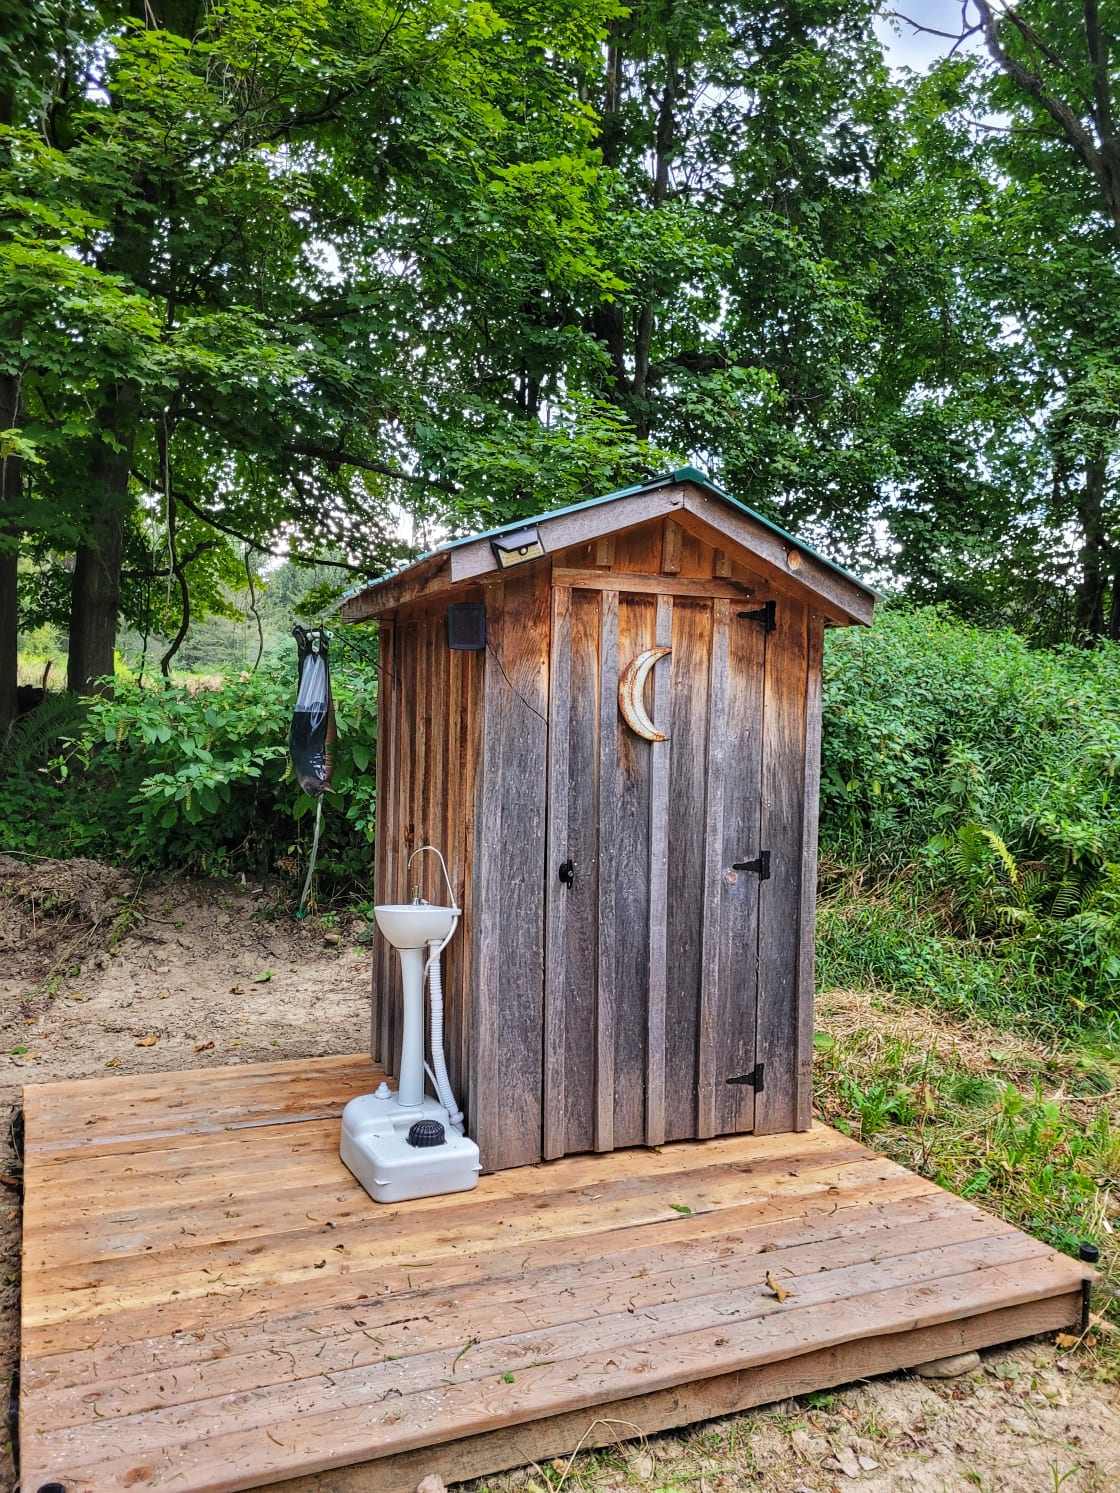 Primitve outhouse available for use, with pump hand wash station and gravity cold water shower. 
Has solar and battery lights. 